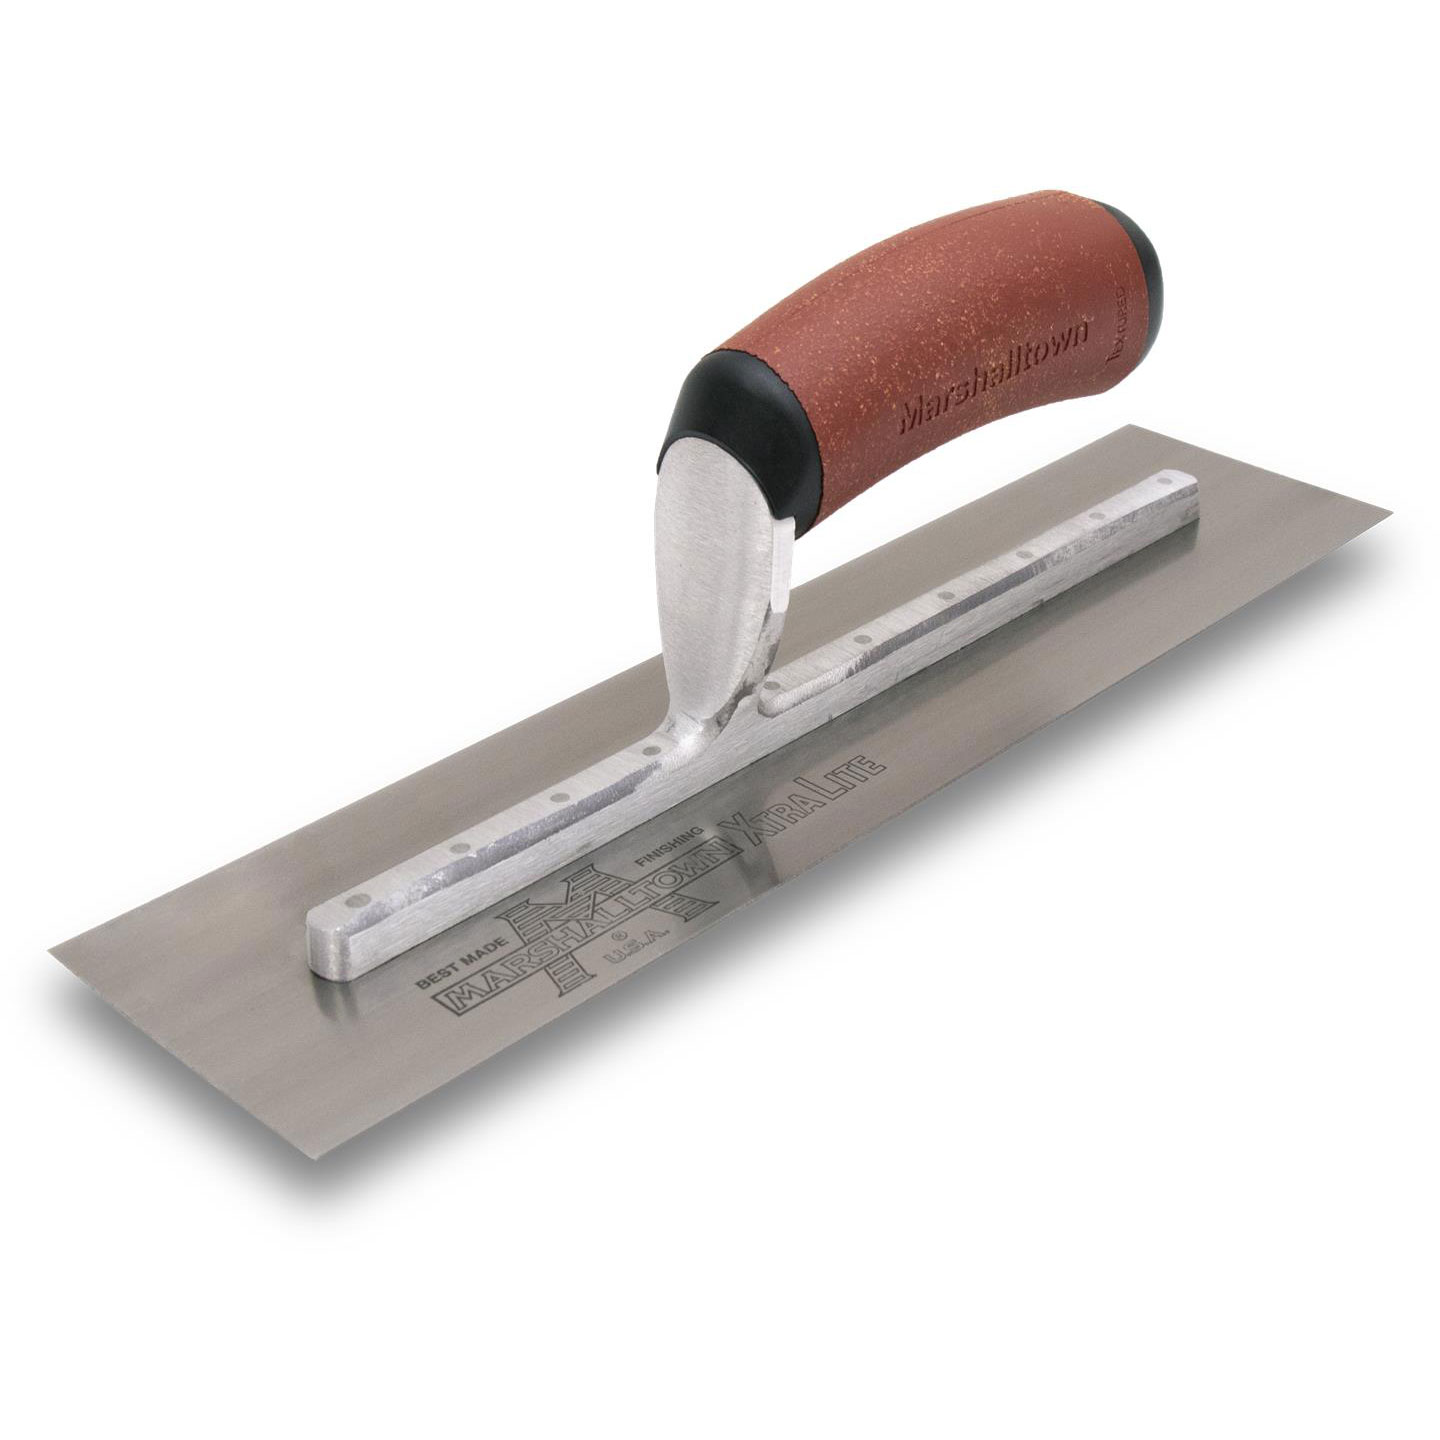 Marshalltown MXS13DC 13in x 5in Finishing Trowel with DuraCork Handle MXS13DC